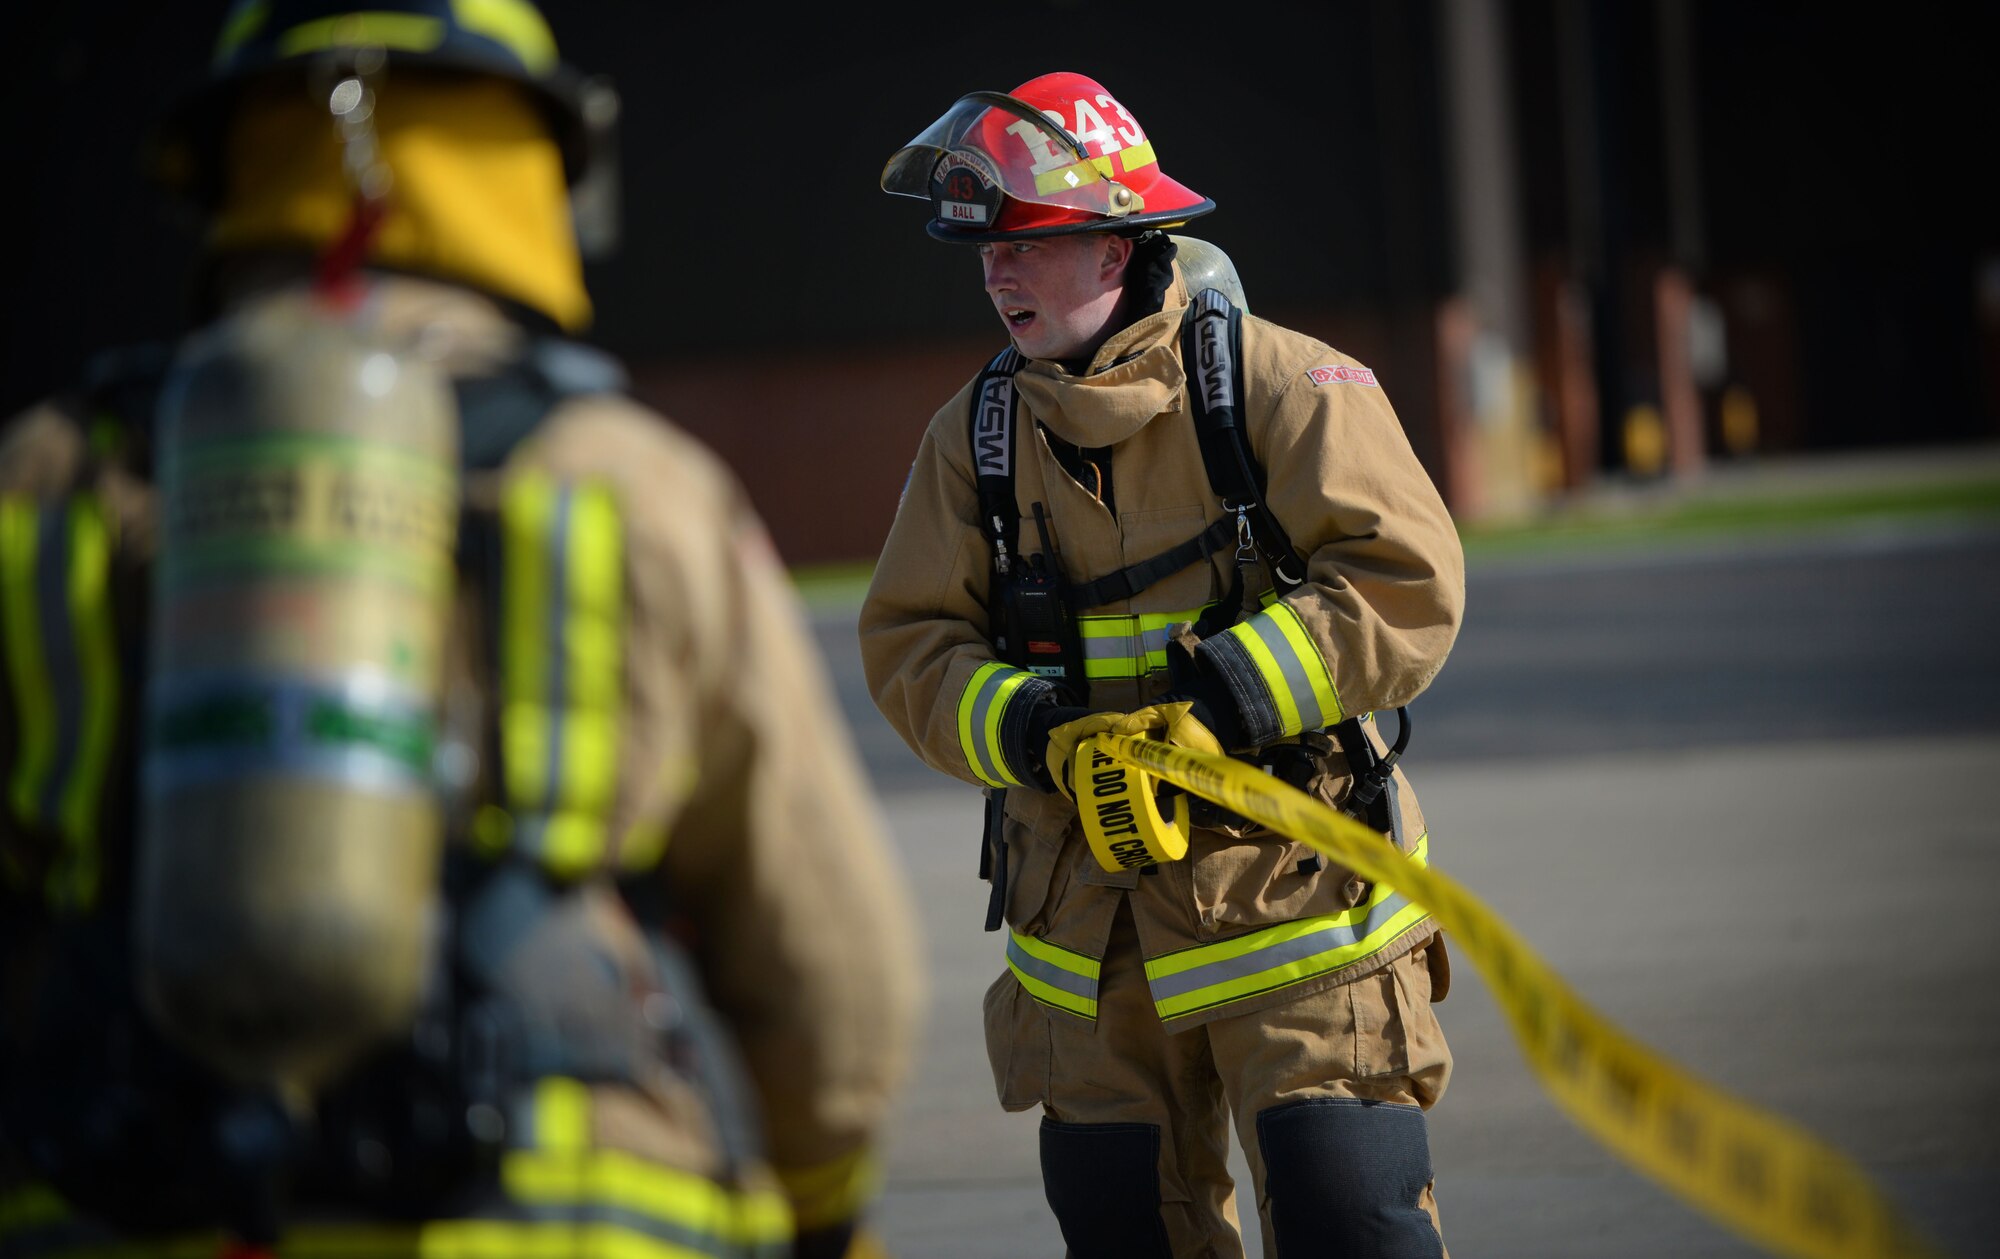 U.S. Air Force Tech. Sgt. Jeffrey Ball, 100th Civil Engineer Squadron firefighter, cordons off an area during an exercise July 15, 2016, on RAF Mildenhall, England. The exercise tested Team Mildenhall first responders during a simulated fuel spill. (U.S. Air Force photo by Senior Airman Christine Halan)